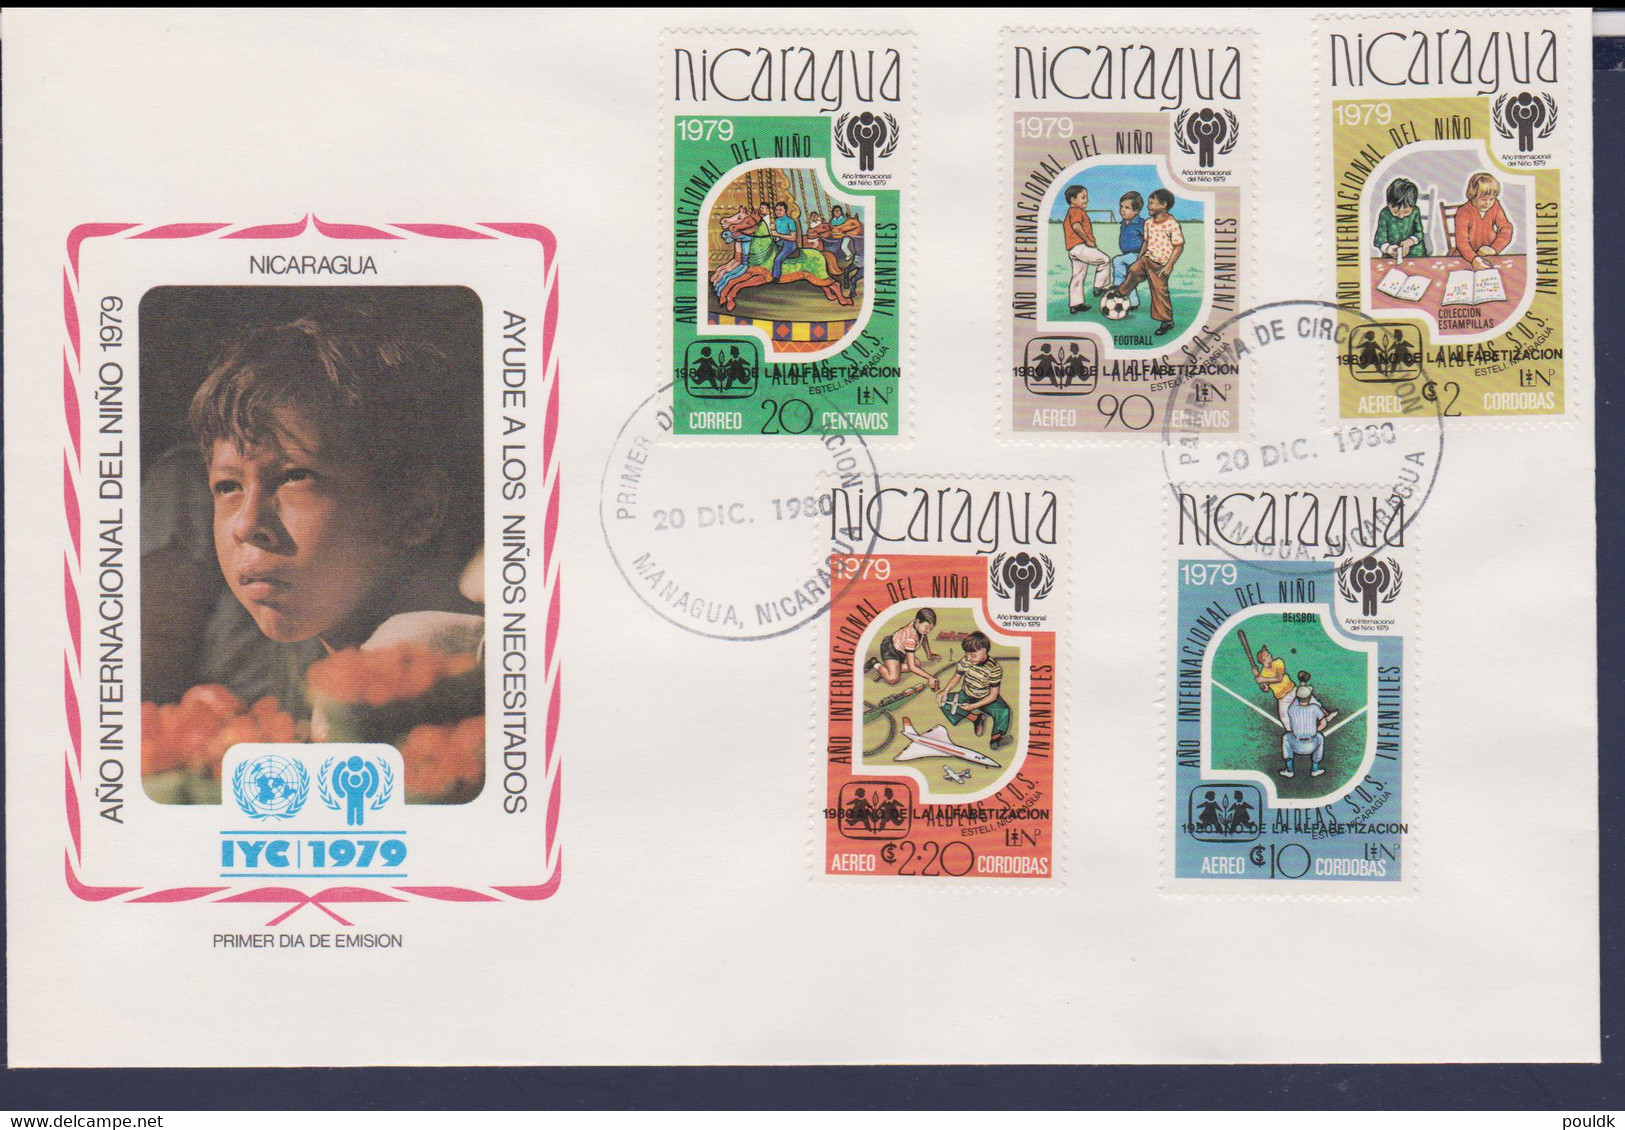 Nicaragua FDC 1979 Int. Year Of Children   (G117-22) - UNICEF